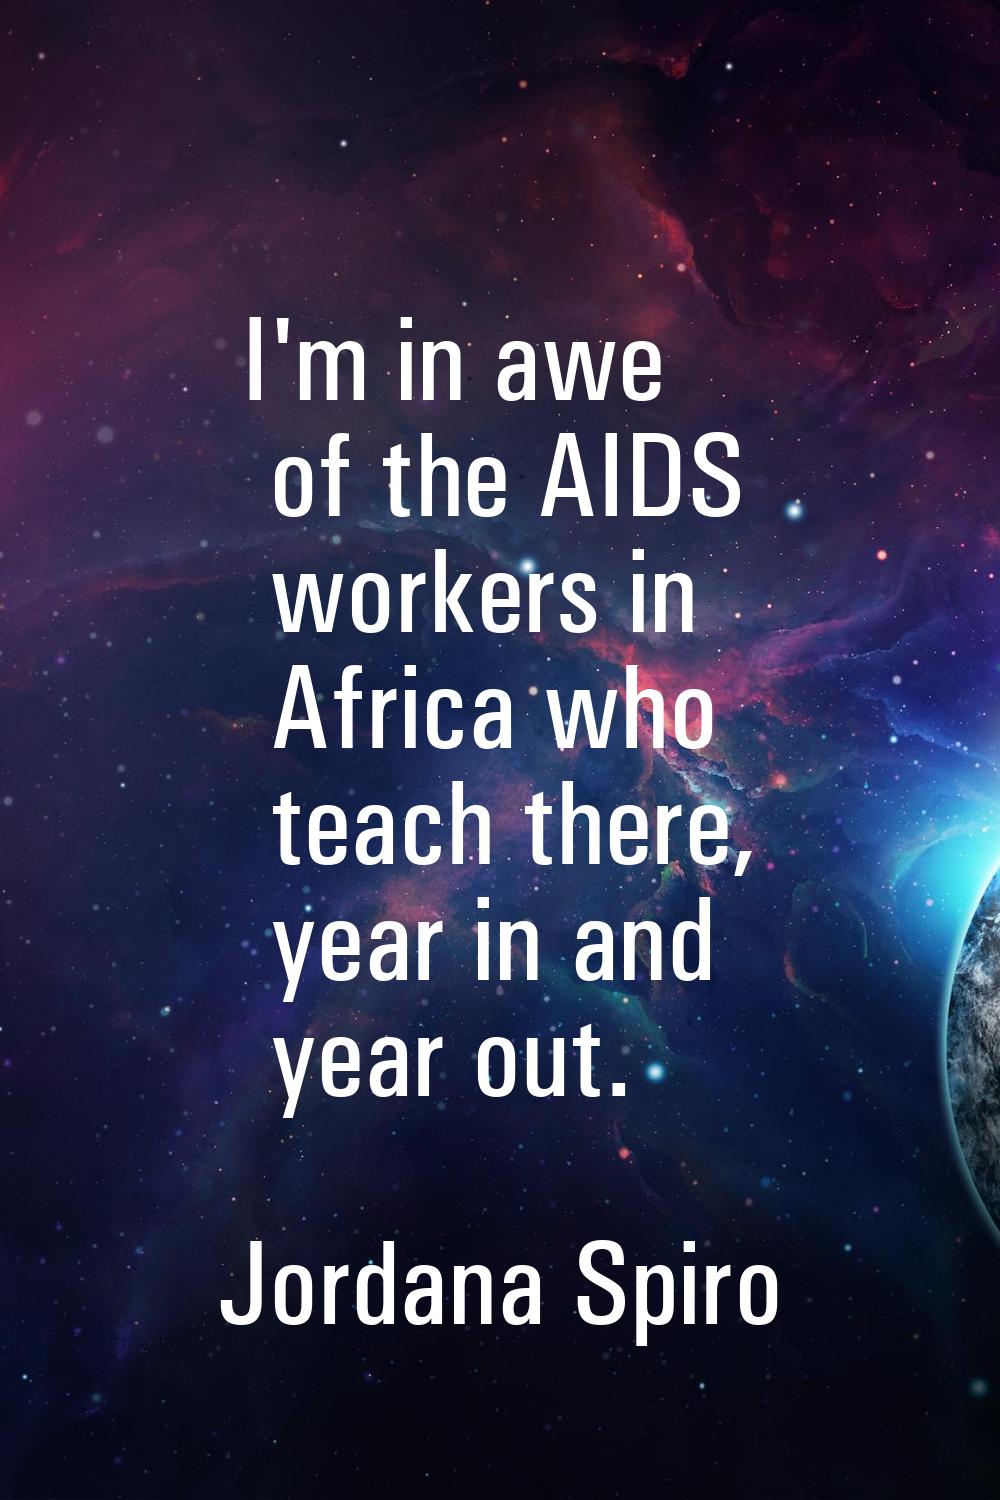 I'm in awe of the AIDS workers in Africa who teach there, year in and year out.